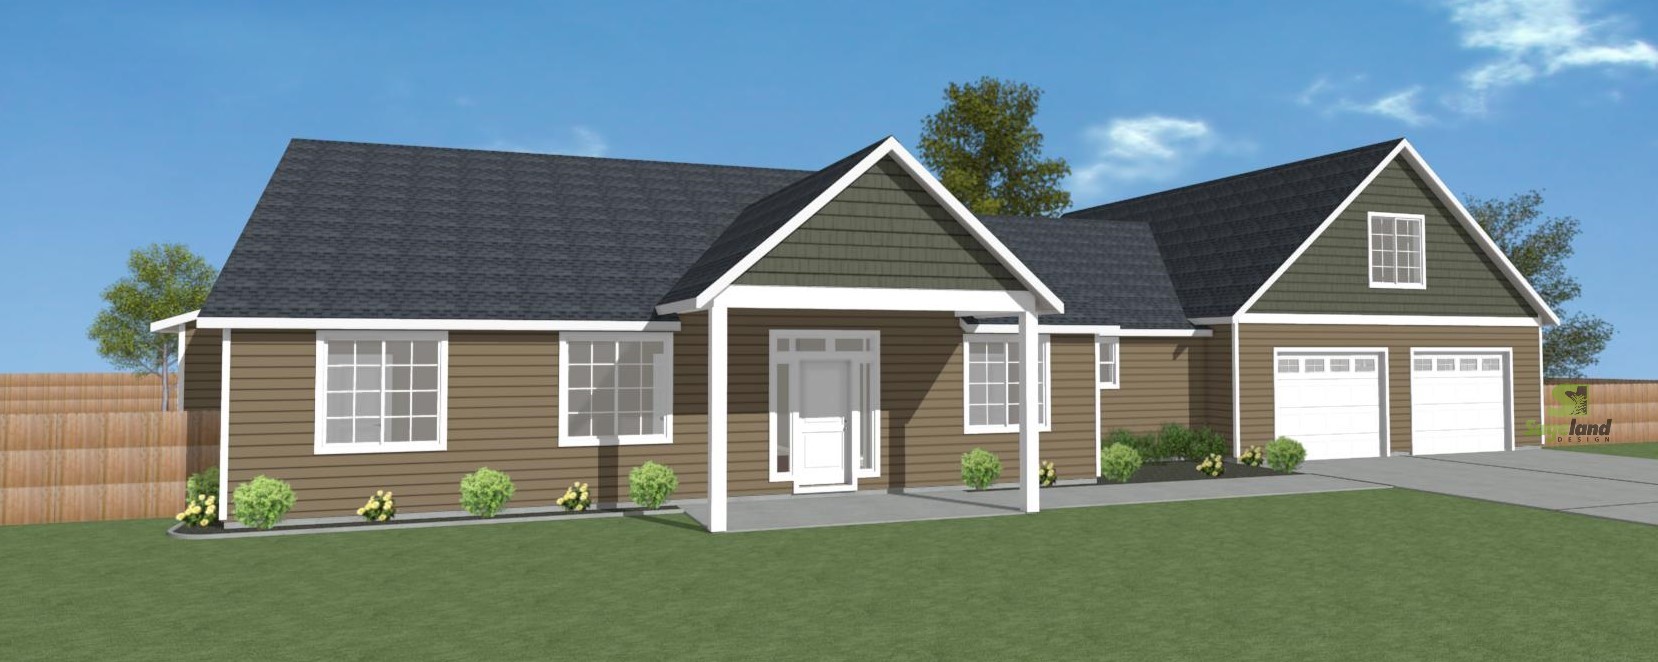 1 Story, 3,163 Sq Ft, 3 Bedroom, 3 Bathroom, 2 Car Garage, Ranch Style Home